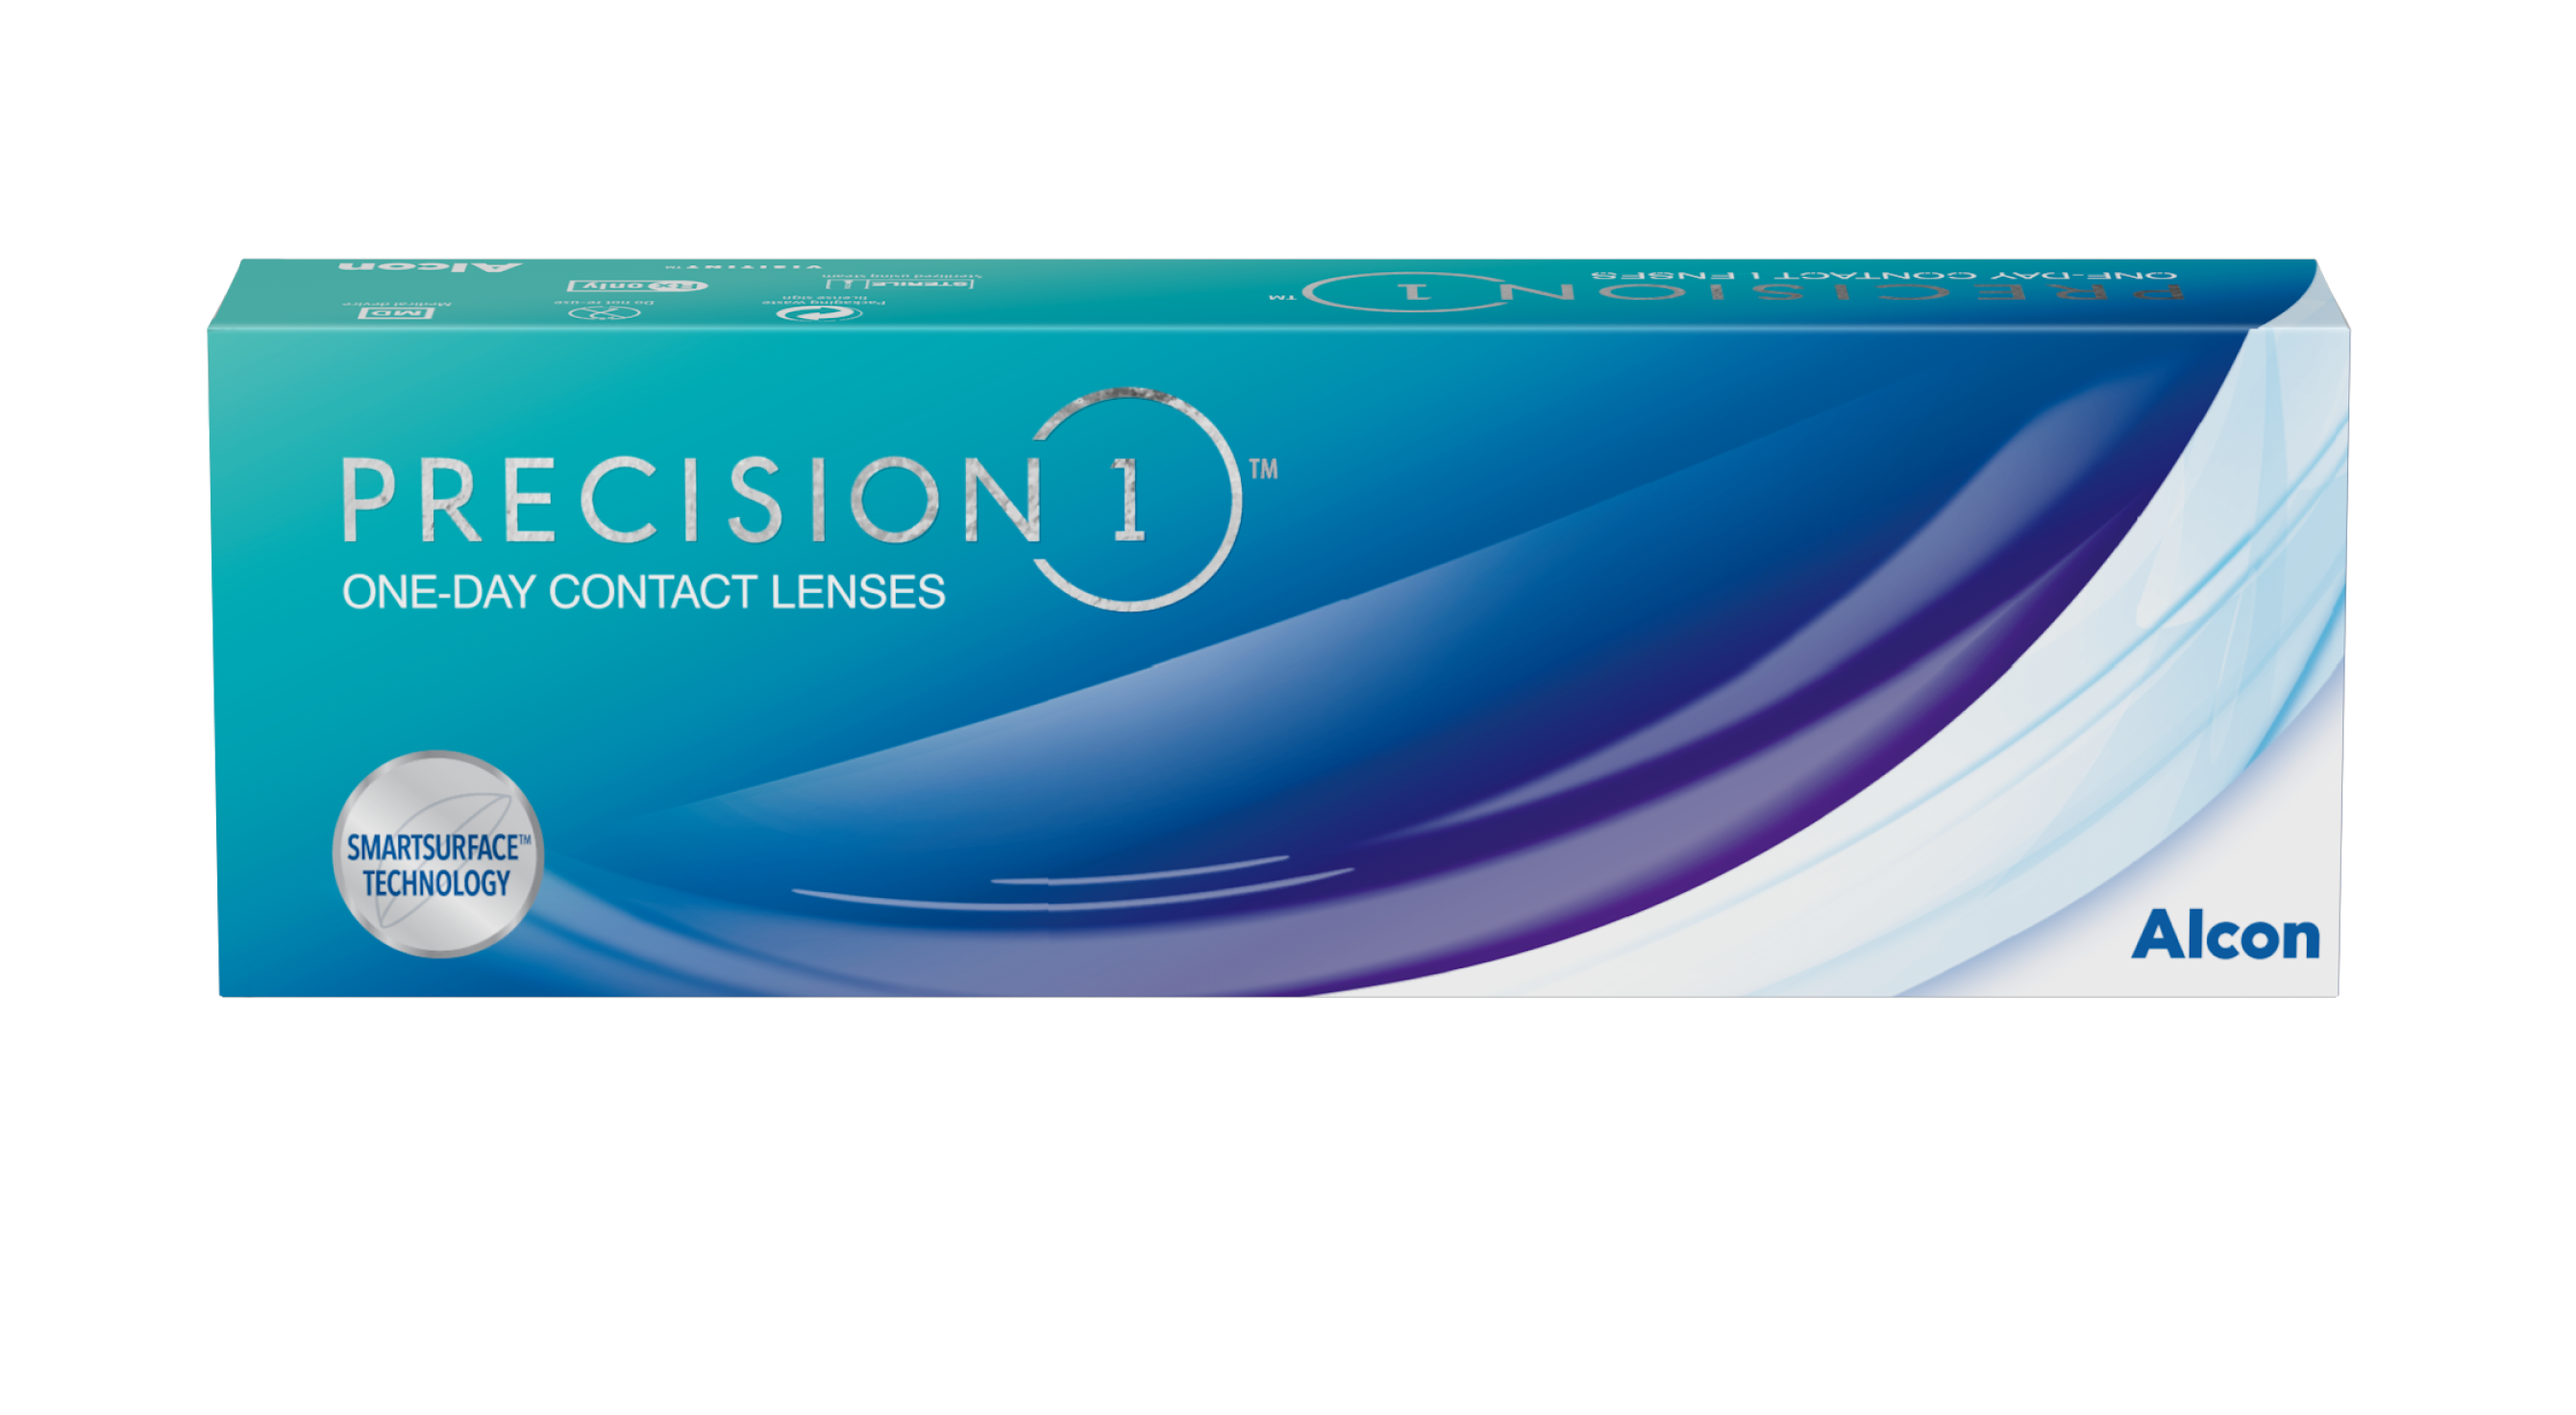 PRECISION1 Contact lens pack